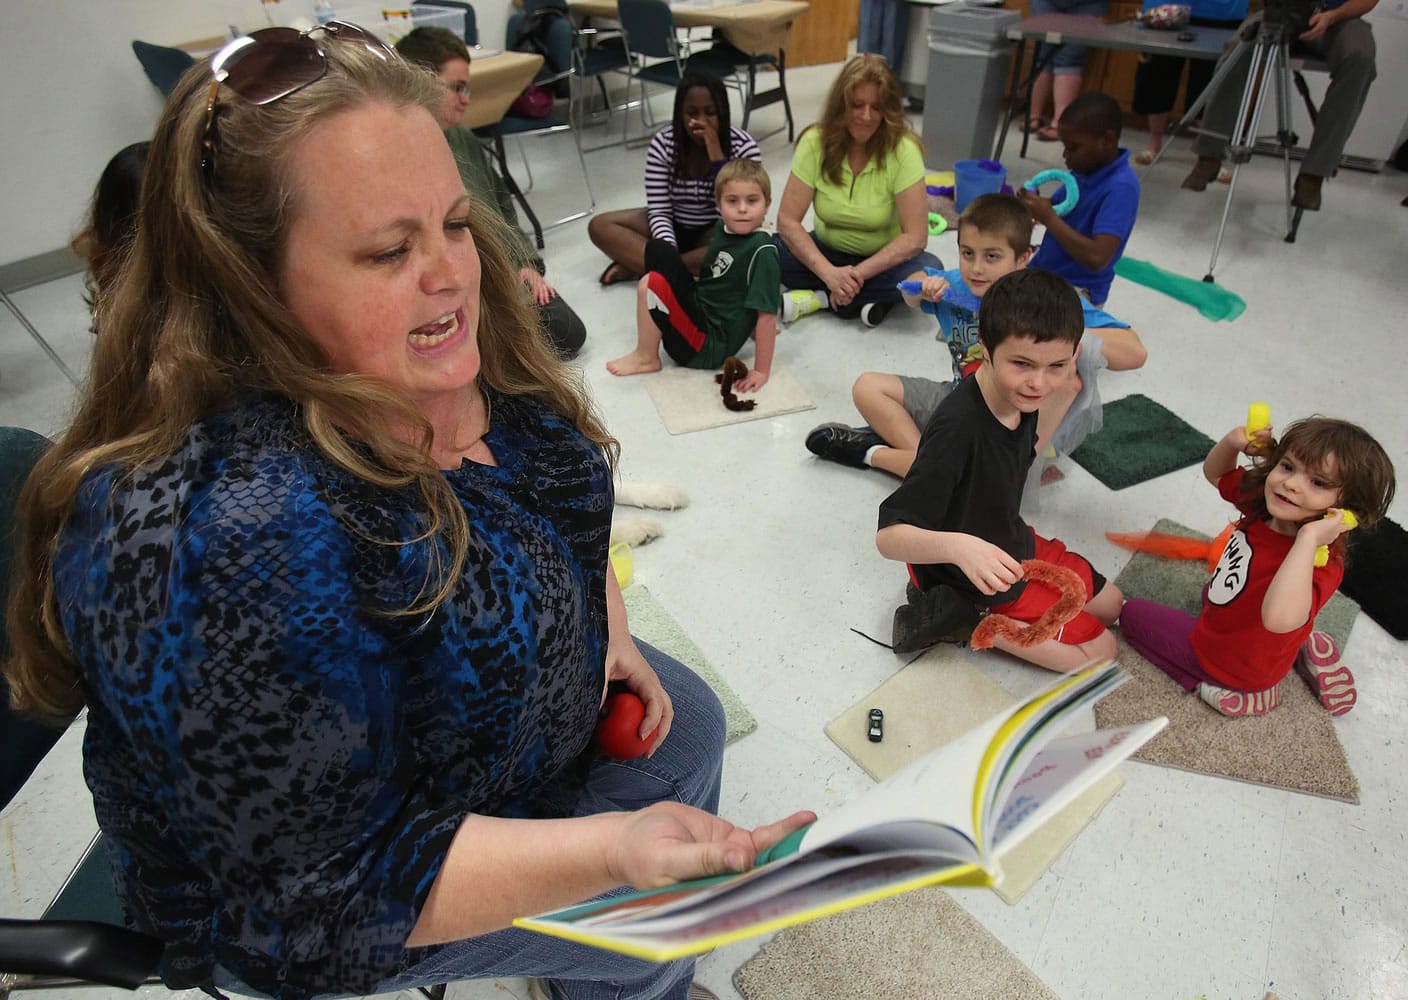 Elizabeth Steele reads to autistic children during an Autism Friendly Storytime event in January at the East Lake County Library in Sorrento, Fla.